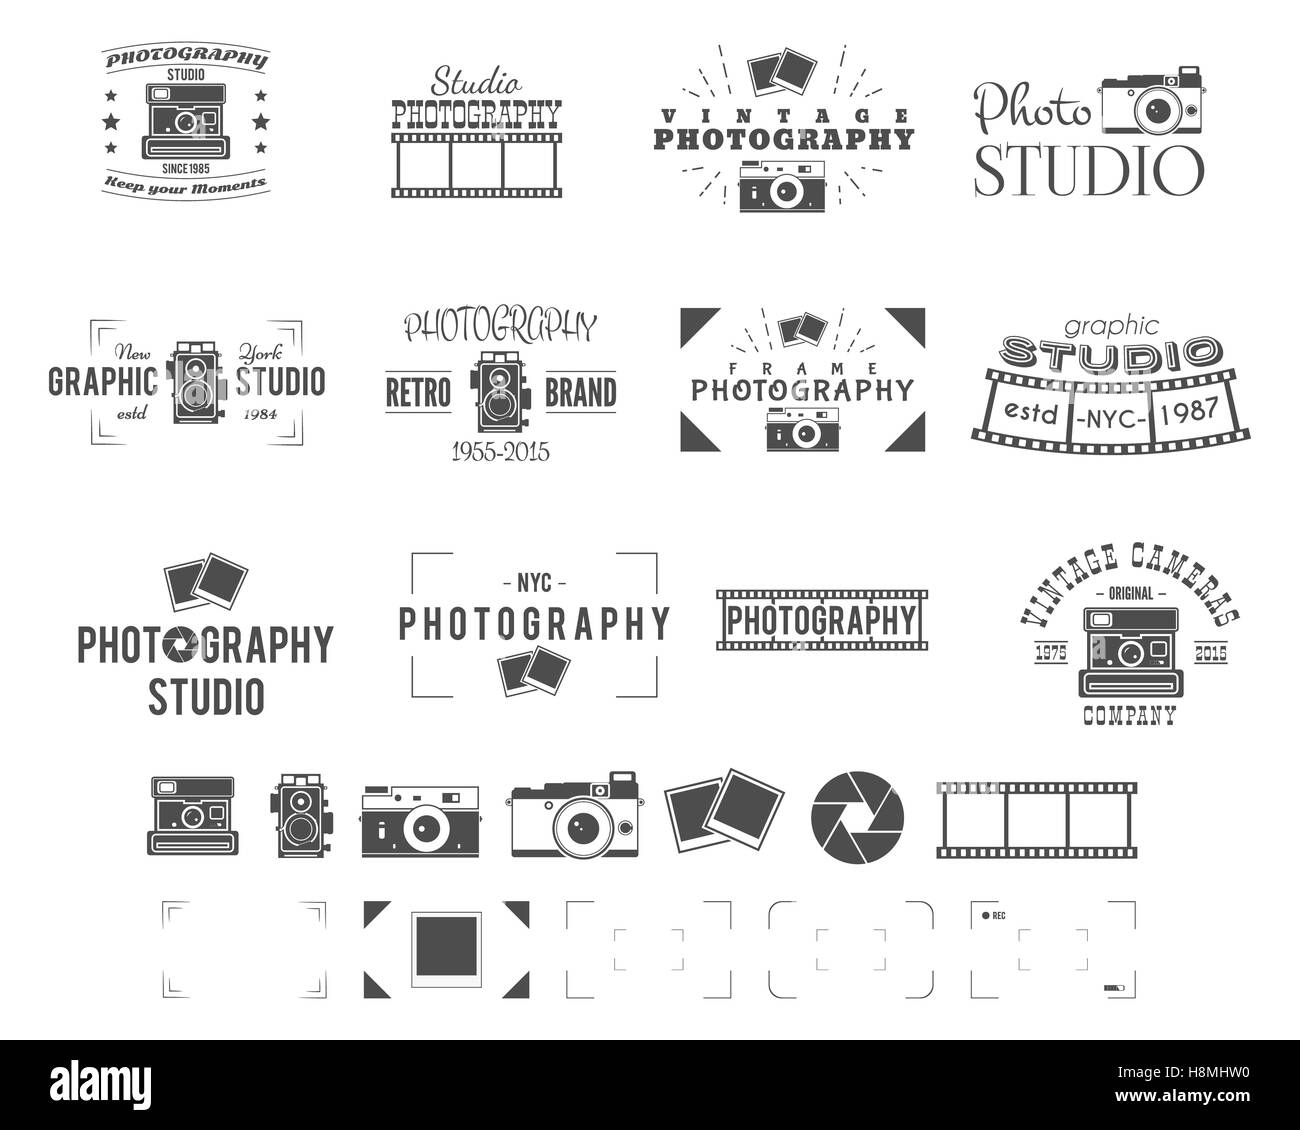 Photography logo templates set. Use for photo studio, old camera equipment store, shop etc. Photographer symbols included - retro cameras, frame and other elements. Stock Photo